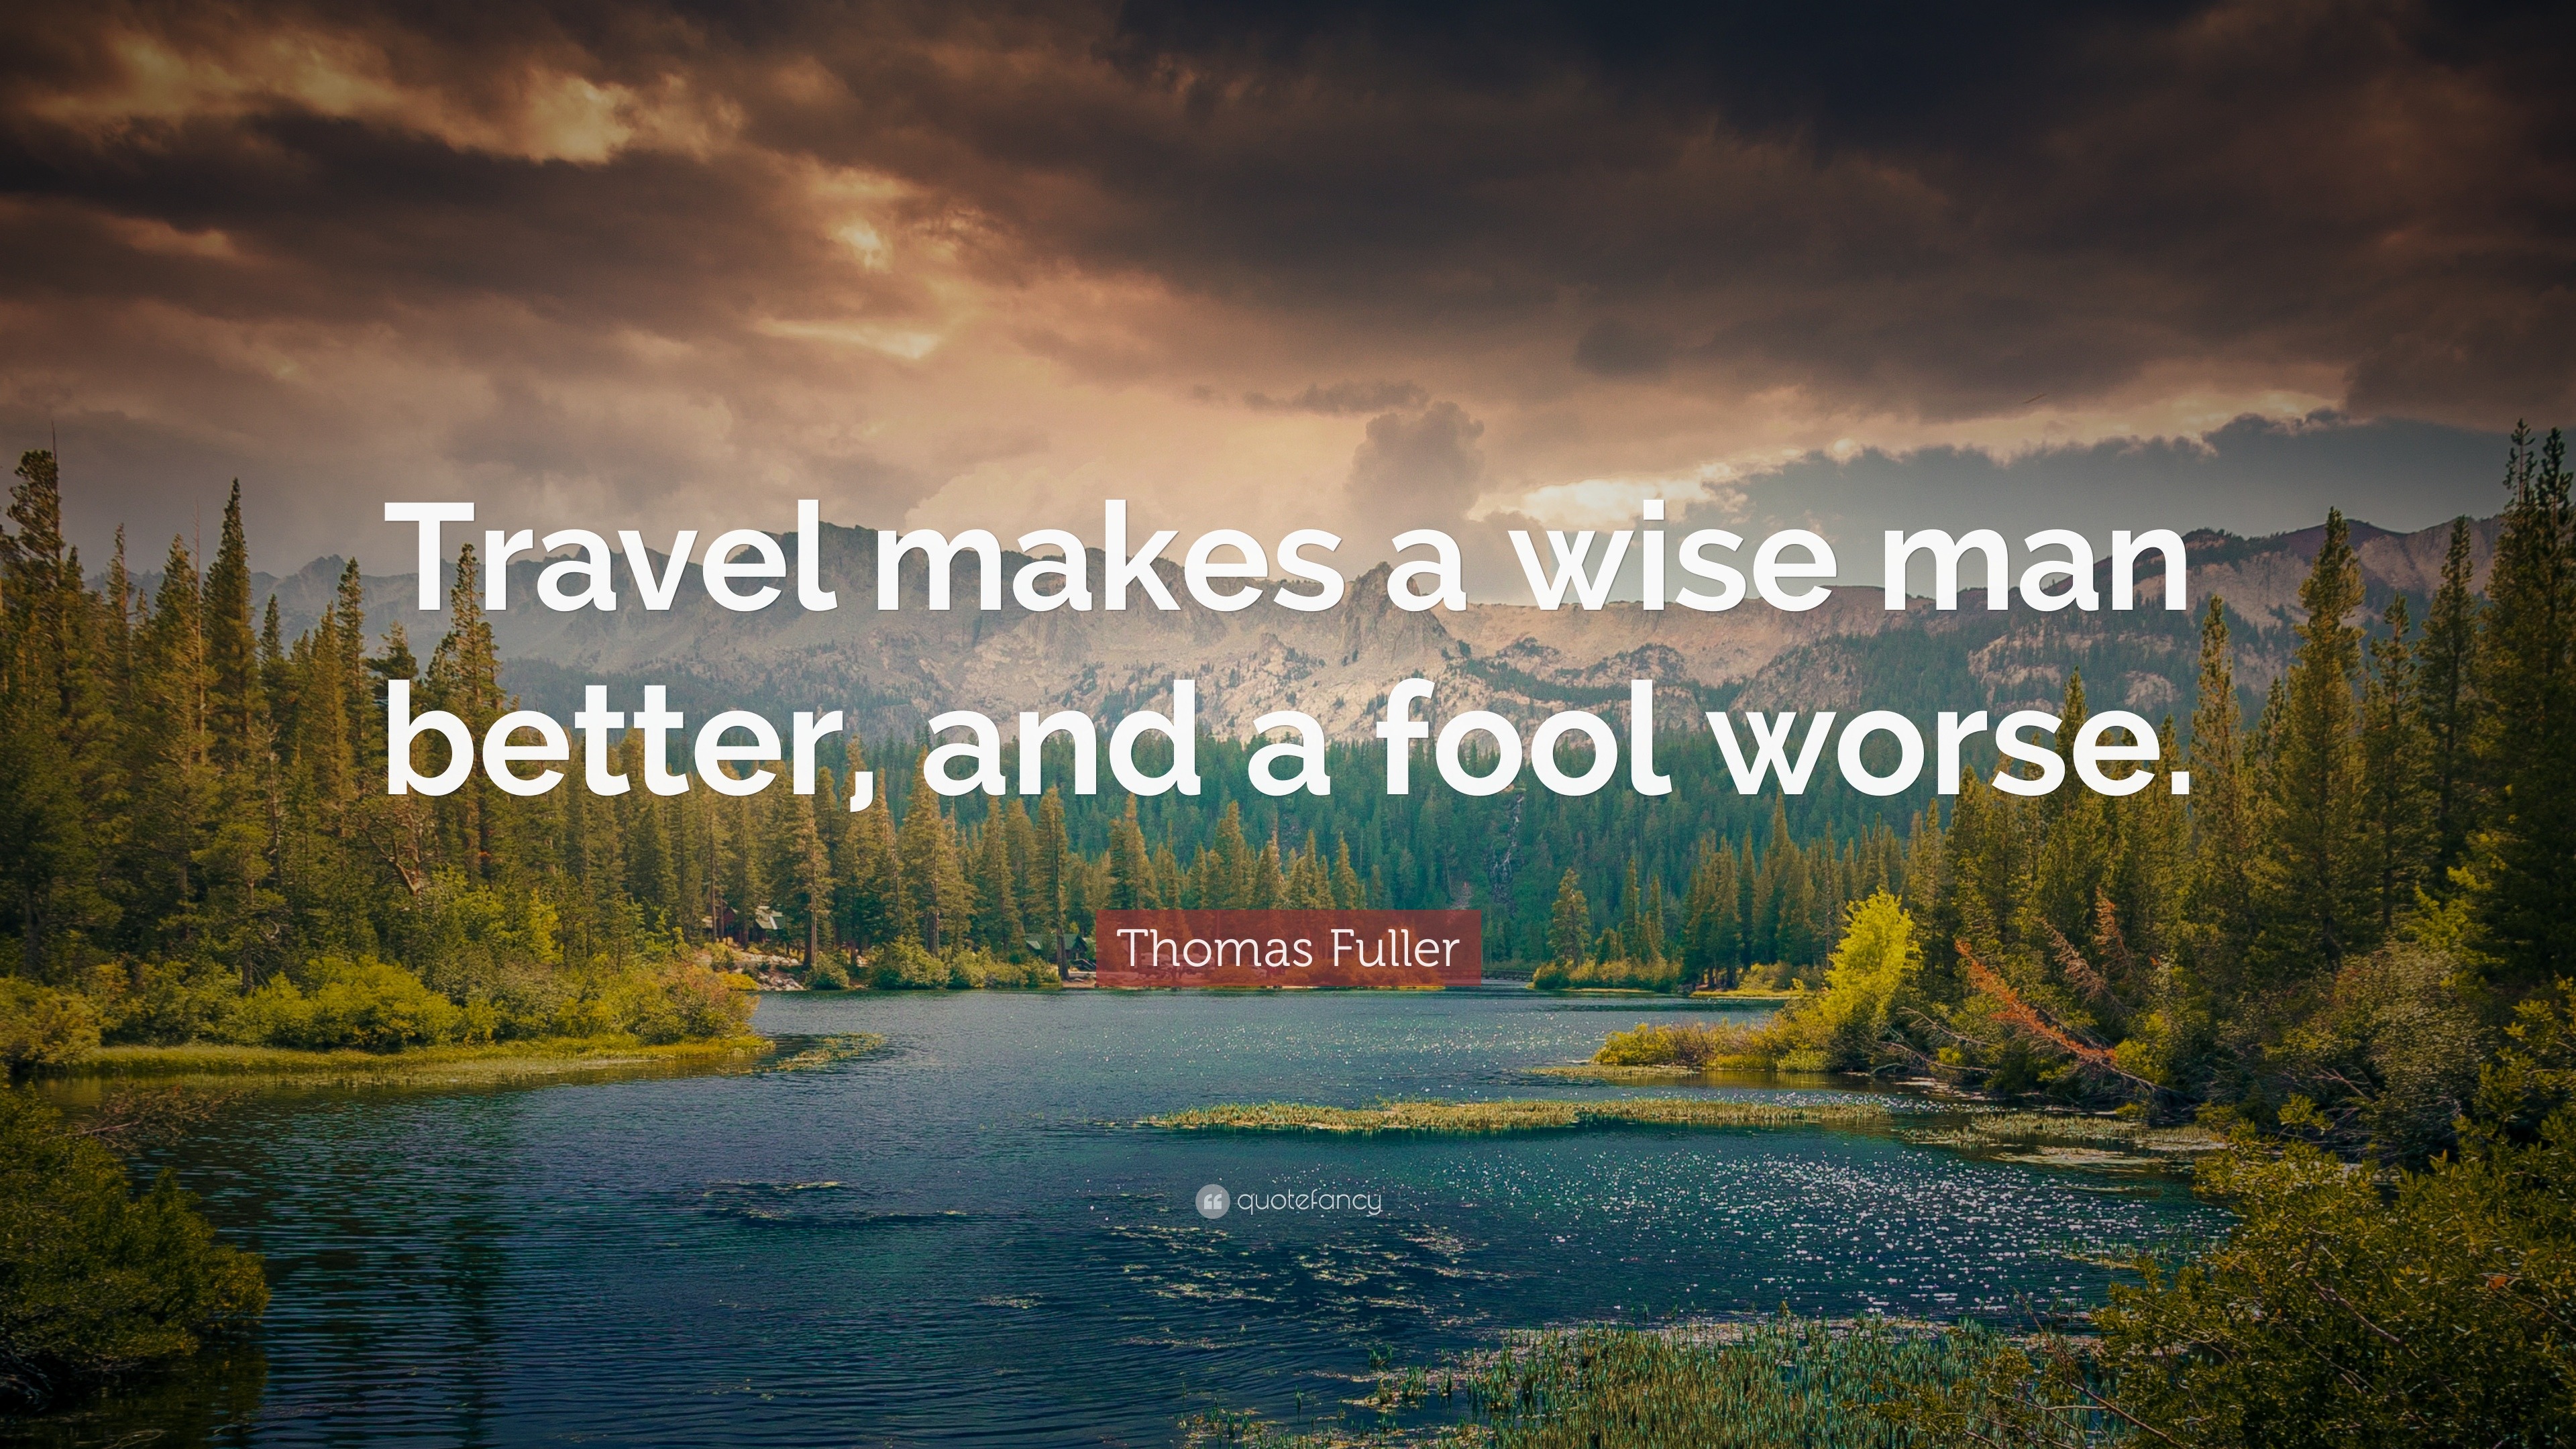 20174-Thomas-Fuller-Quote-Travel-makes-a-wise-man-better-and-a-fool.jpg